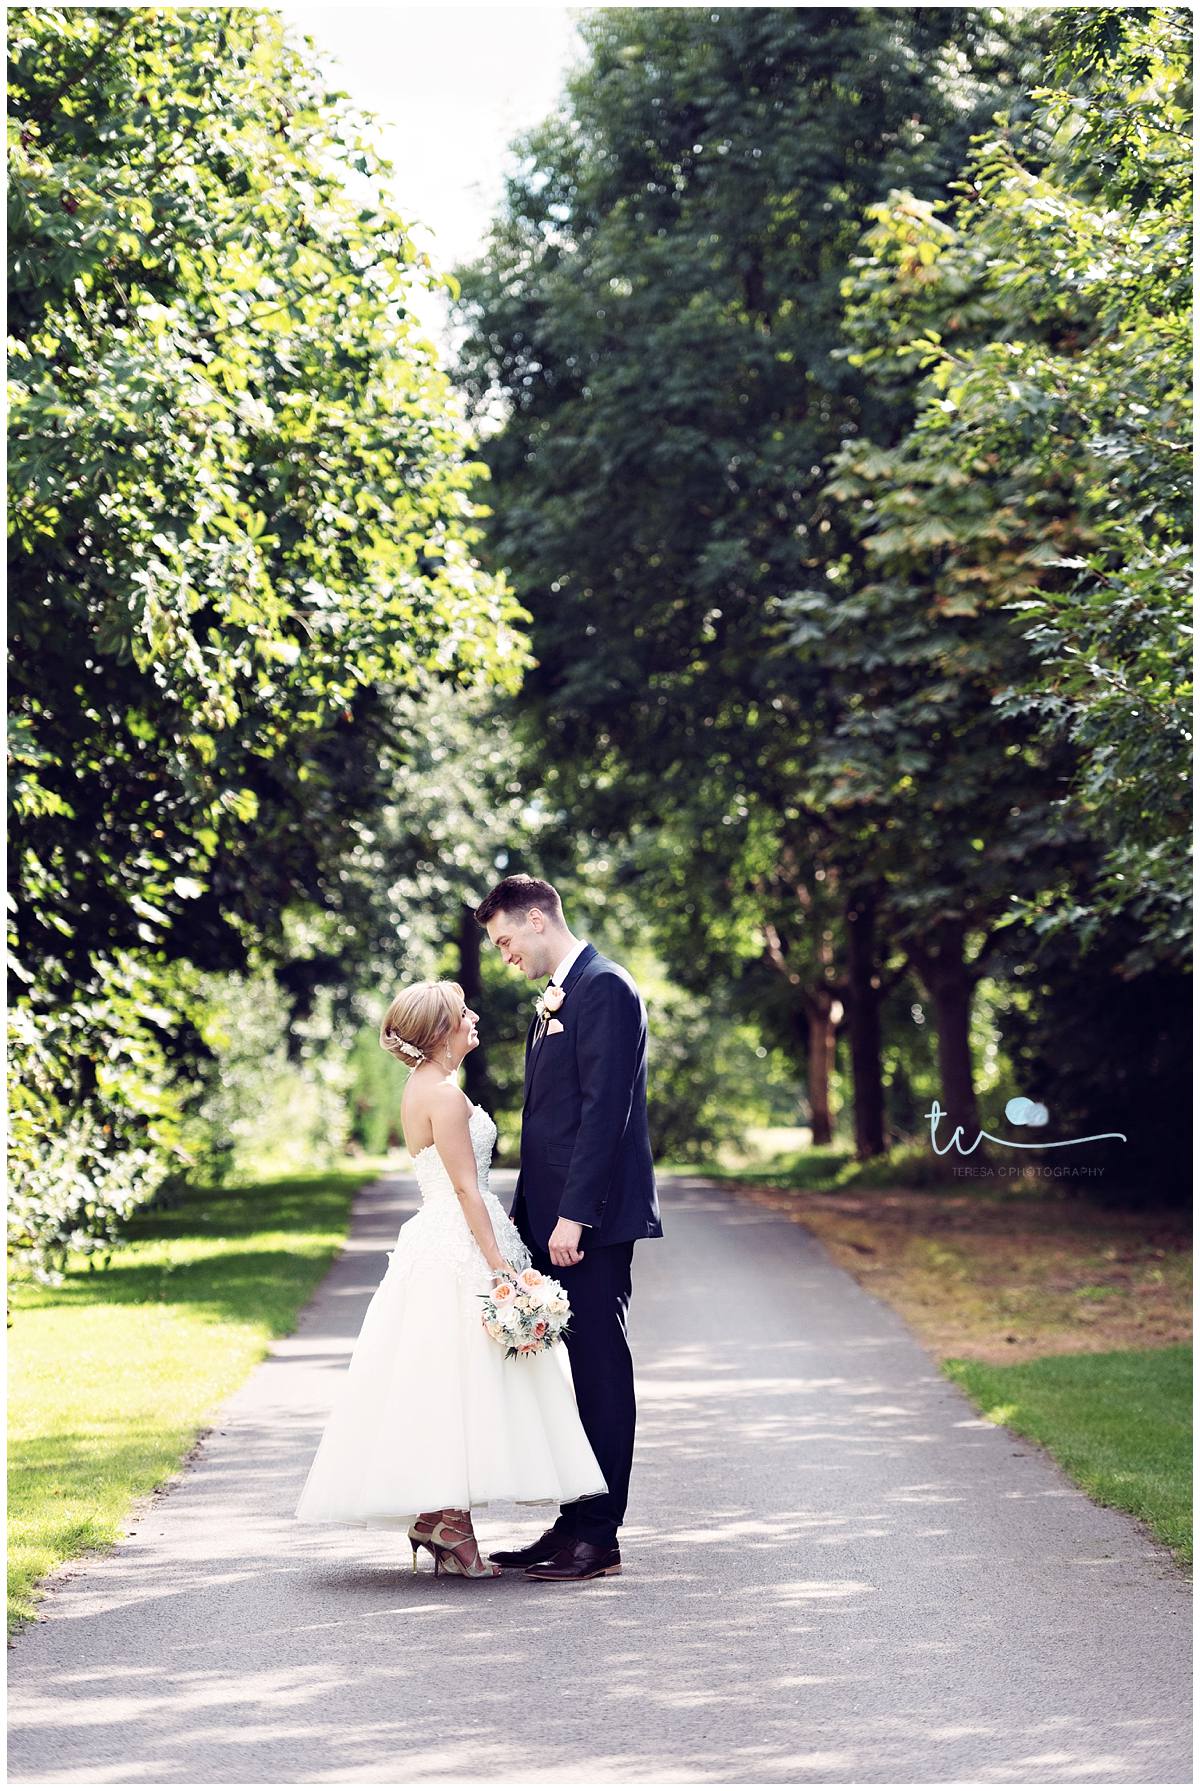 The+Oak+Tree+of+Peaover-Wedding+Photography+Cheshire-Wedding+Photographer+Cheshire-Documentry+Wedding+Photography-Fun+Relaxed+Creative